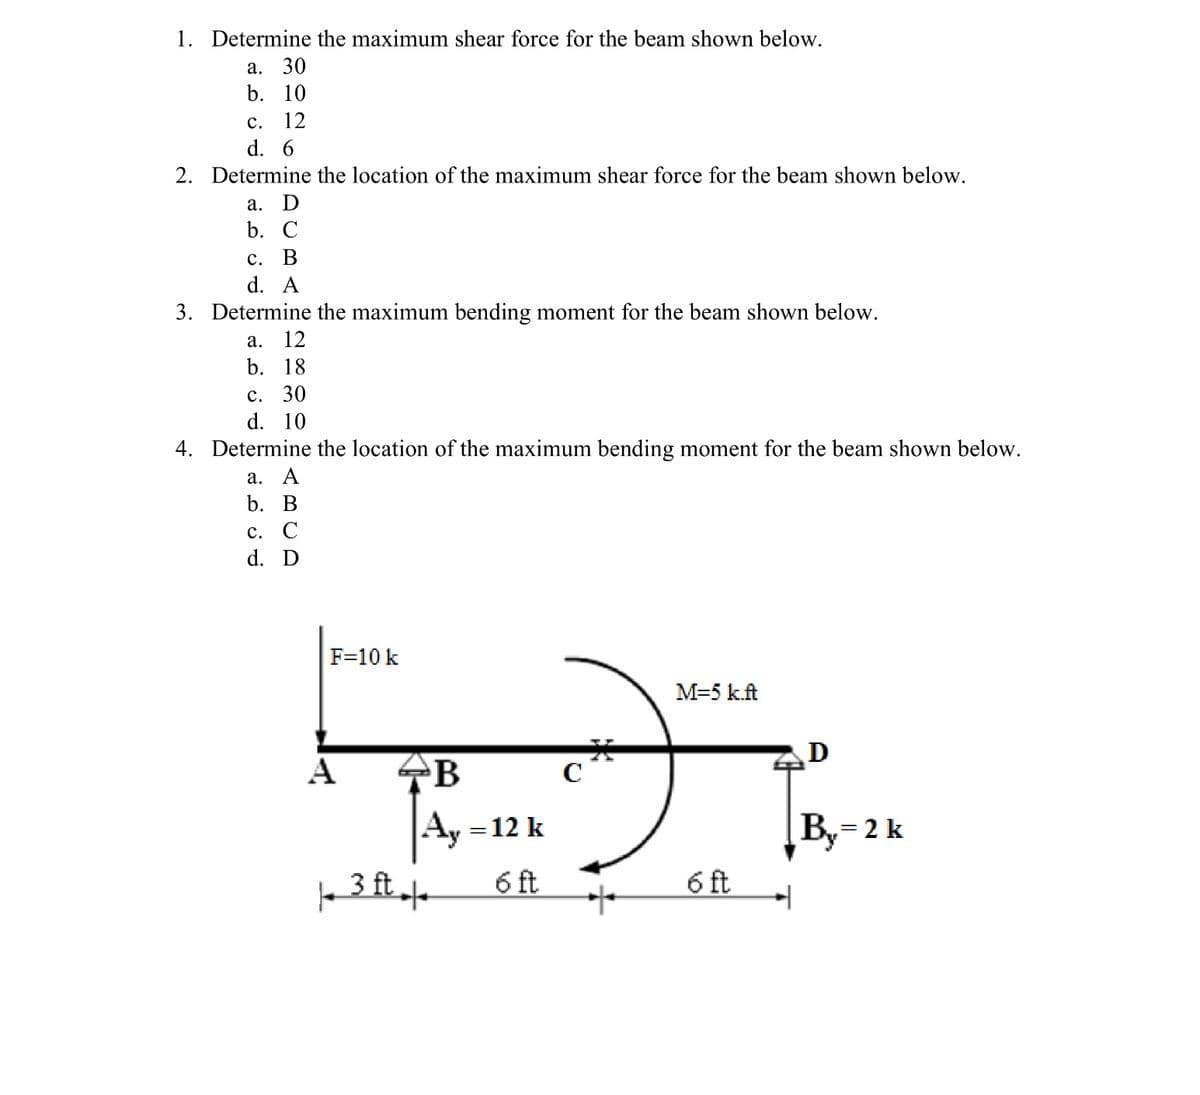 1. Determine the maximum shear force for the beam shown below.
a. 30
b. 10
C. 12
d. 6
2. Determine the location of the maximum shear force for the beam shown below.
a. D
b. C
c. B
d. A
3. Determine the maximum bending moment for the beam shown below.
a. 12
b. 18
c. 30
d. 10
4. Determine the location of the maximum bending moment for the beam shown below.
a. A
b. B
с. С
d. D
F=10 k
M=5 k.ft
×
A
B
C
= 12 k
| 3 ft |
6 ft
6 ft
*
By=2k